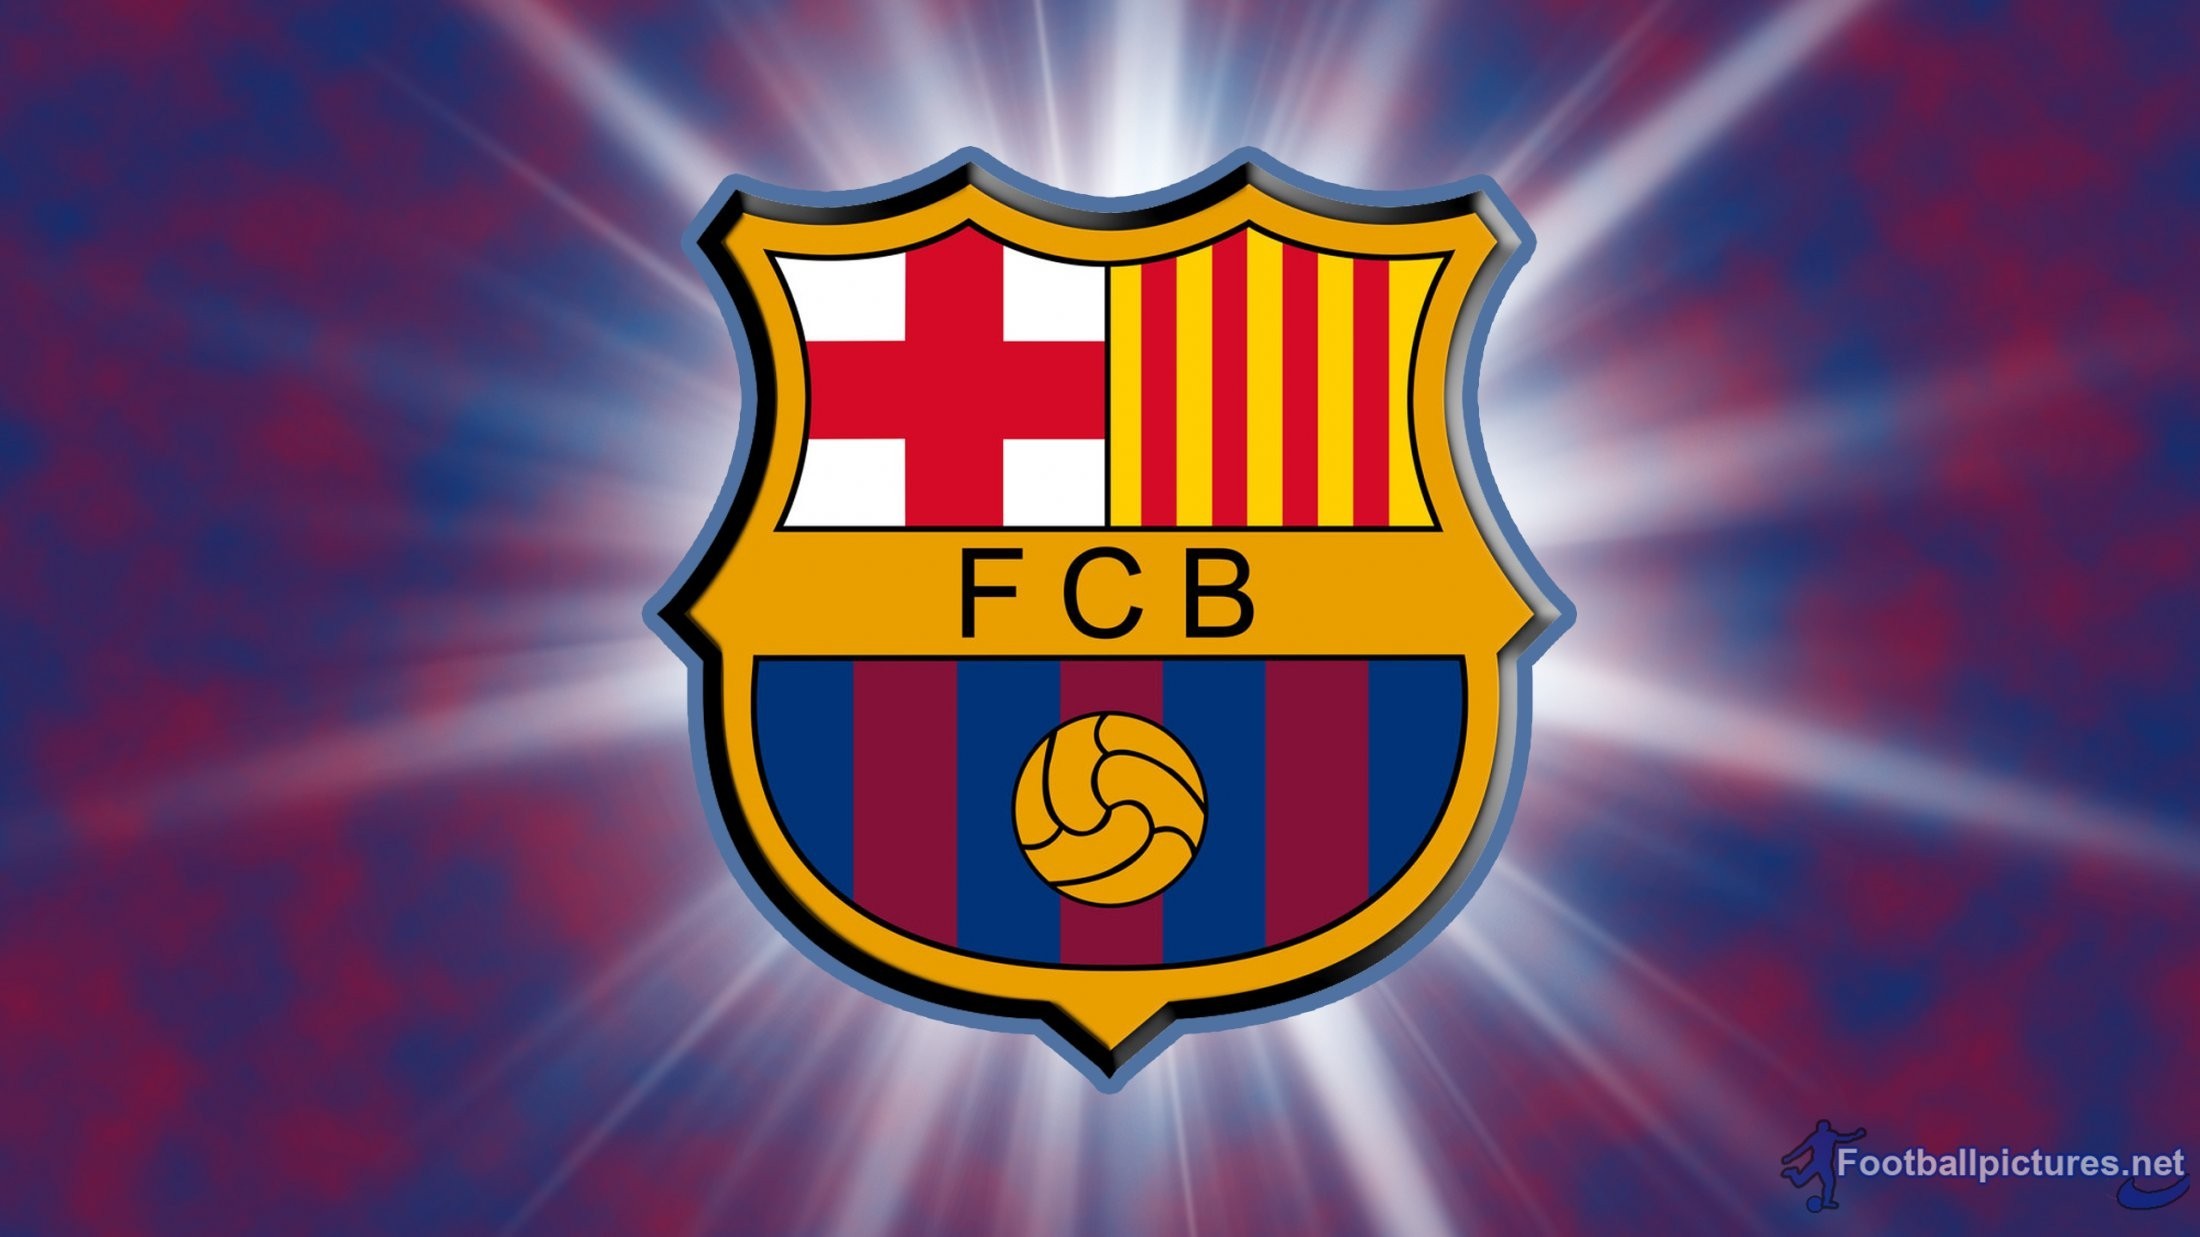 Beautiful Fc Barcelona Logo Wallpaper For Android DHS9